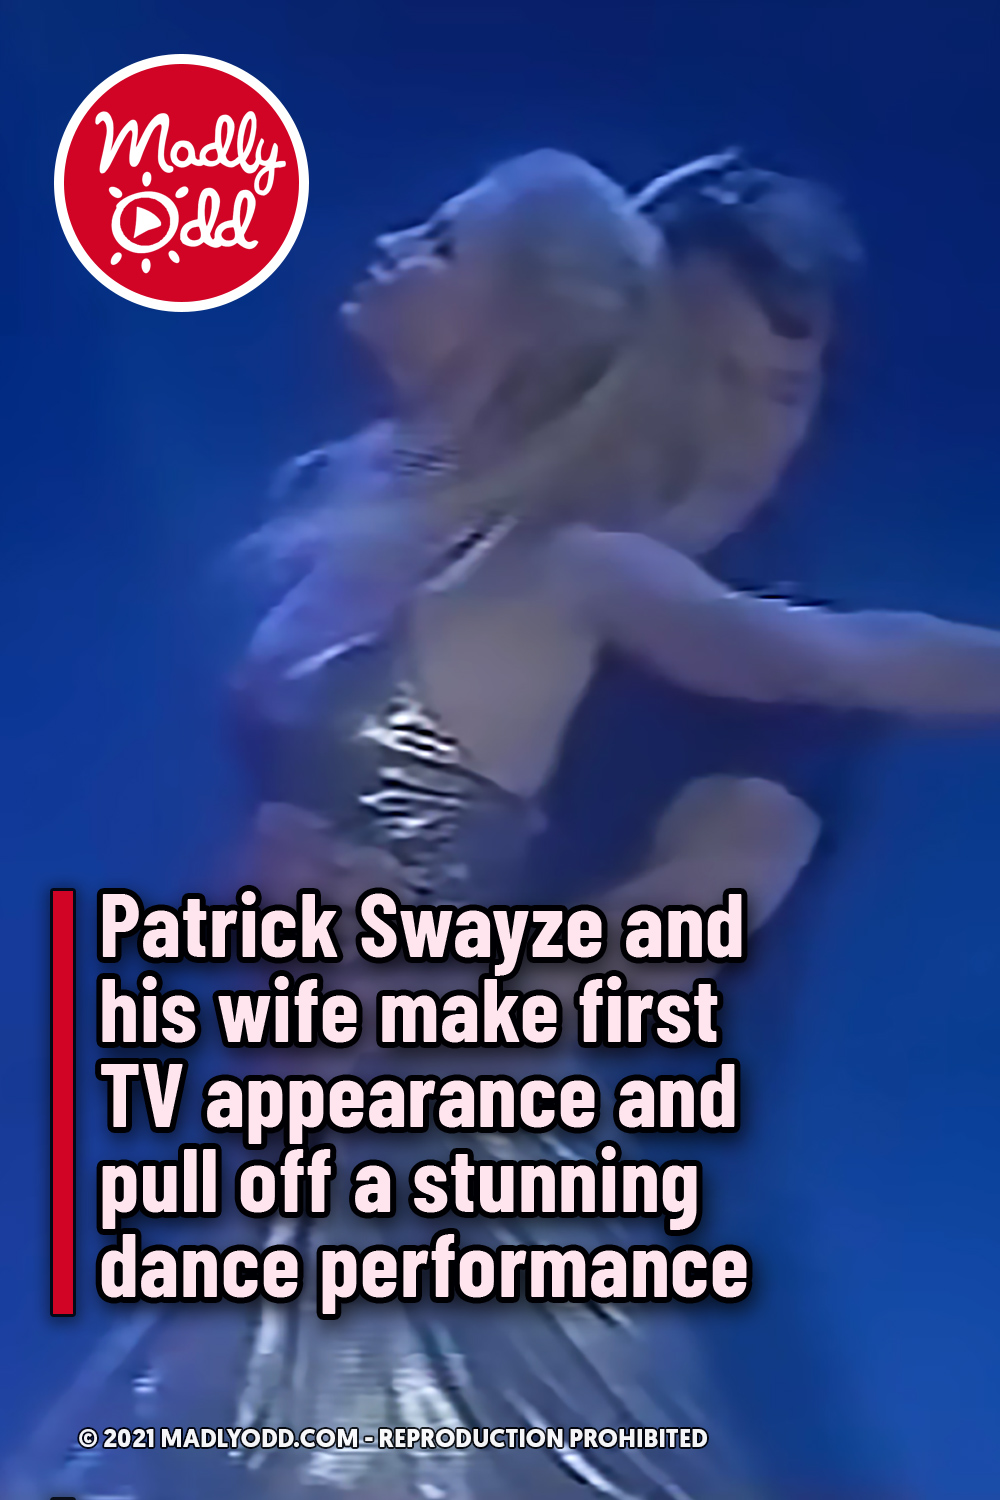 Patrick Swayze and his wife make first TV appearance and pull off a stunning dance performance